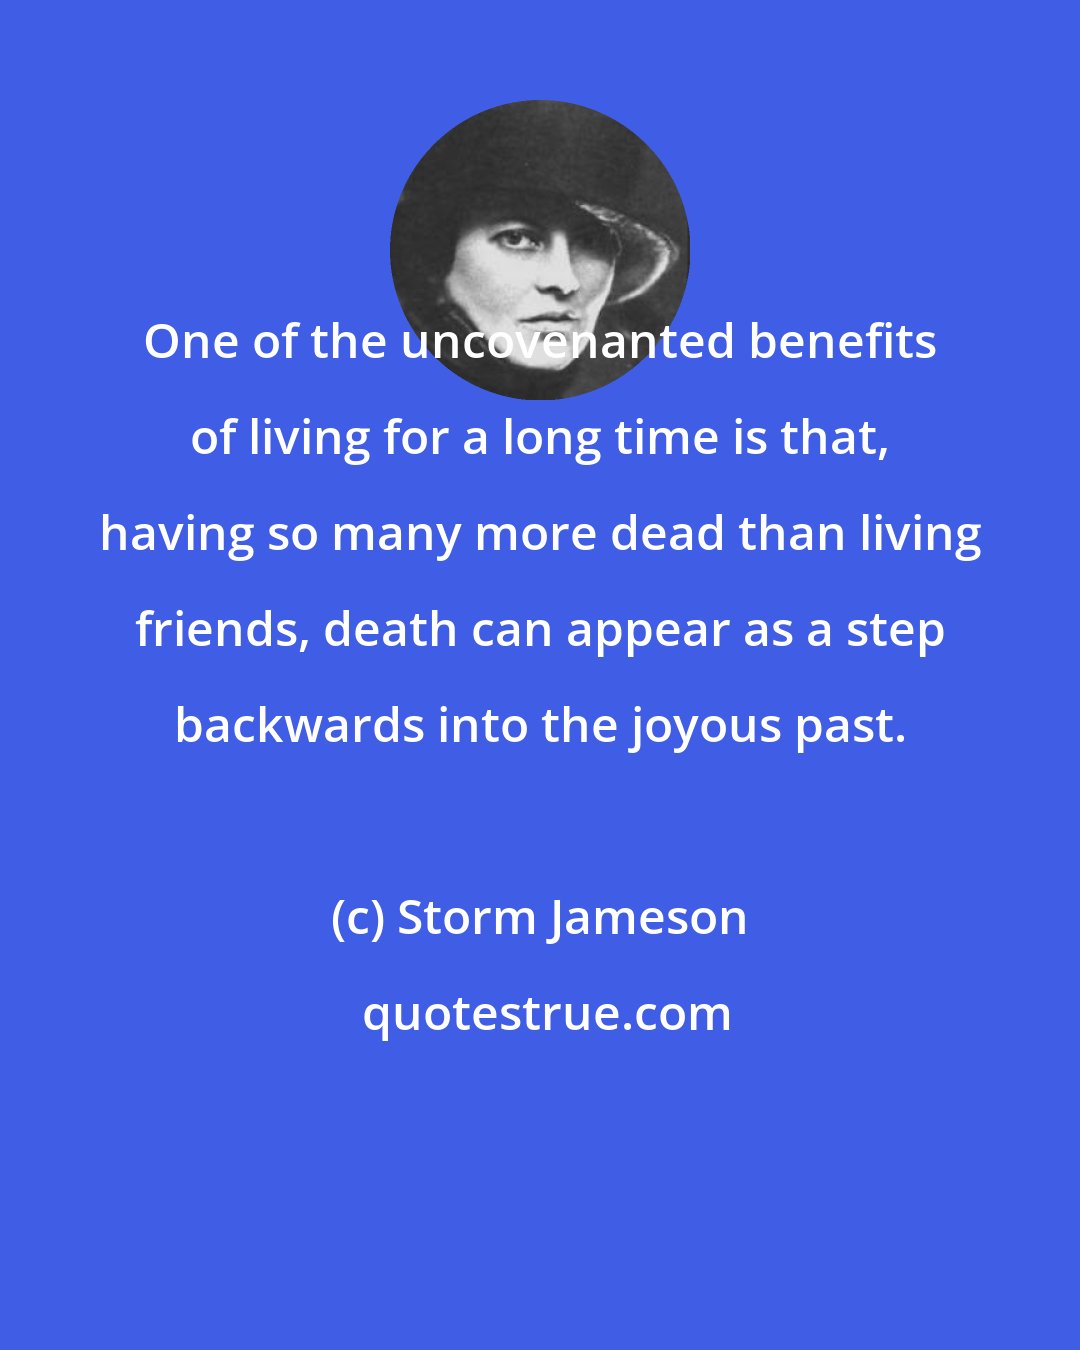 Storm Jameson: One of the uncovenanted benefits of living for a long time is that, having so many more dead than living friends, death can appear as a step backwards into the joyous past.